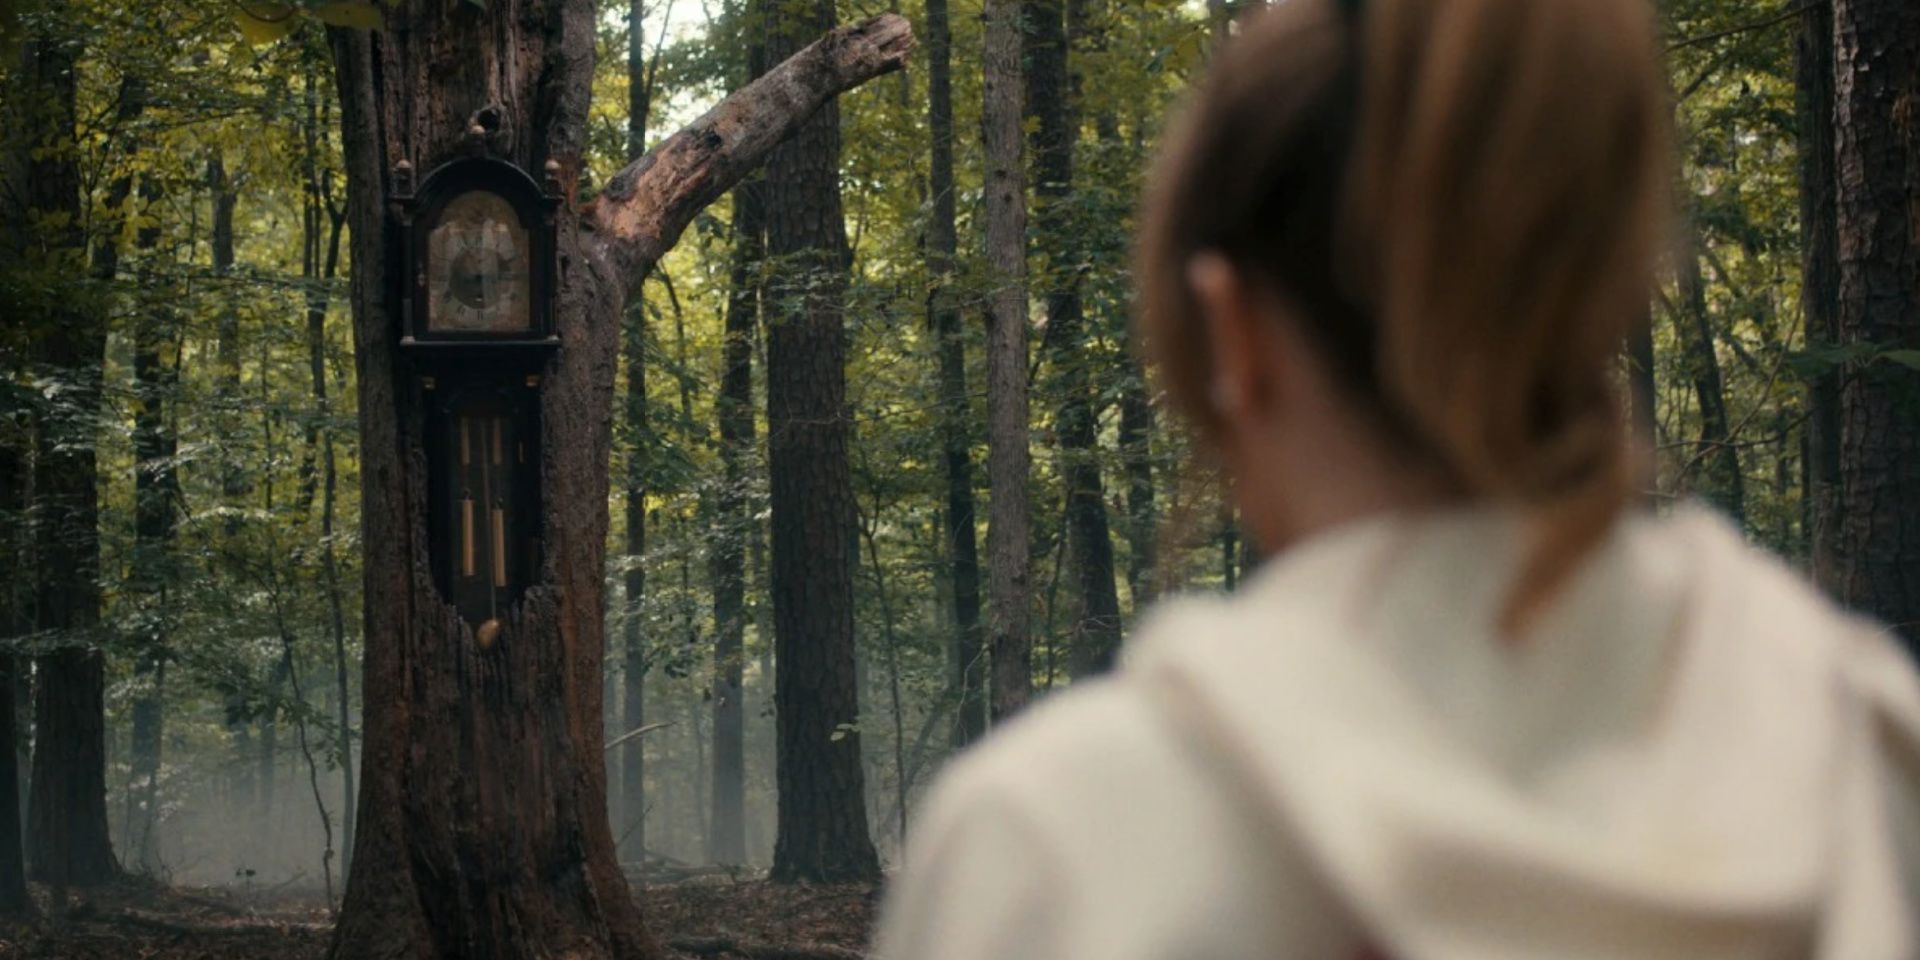 Chrissy sees a vision of the grandfather clock under Vecna's curse in Stranger Things